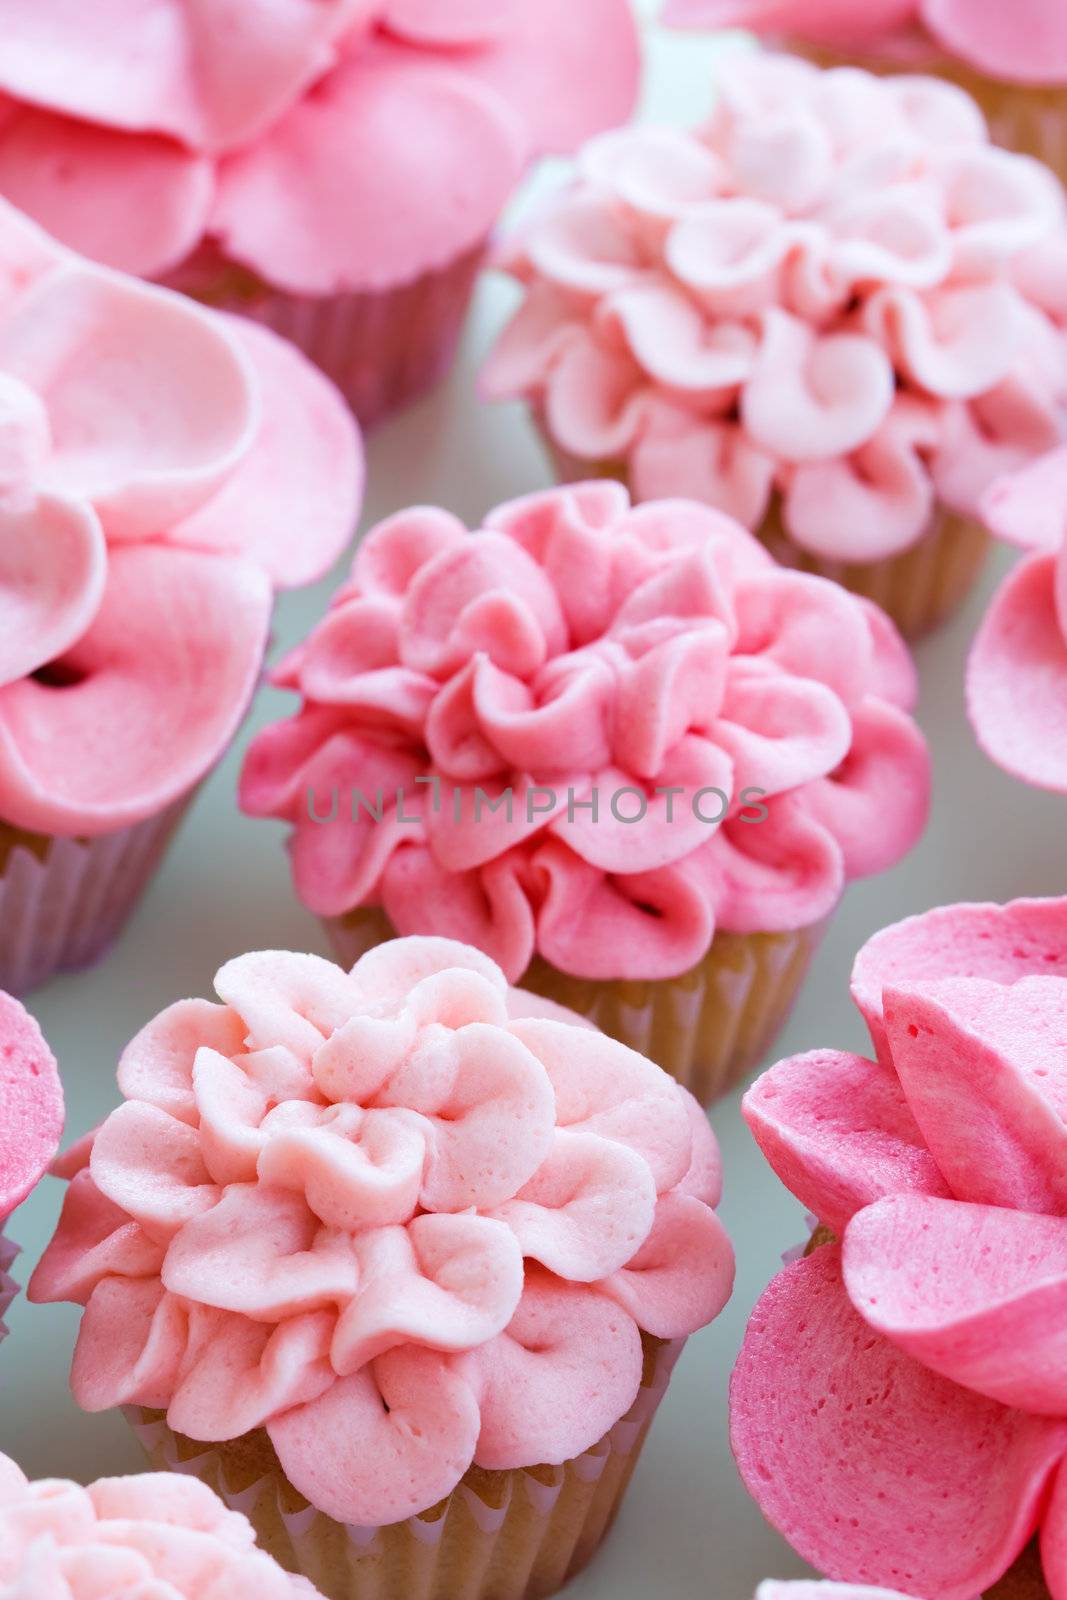 Assortment of cupcakes decorated with buttercream flowers